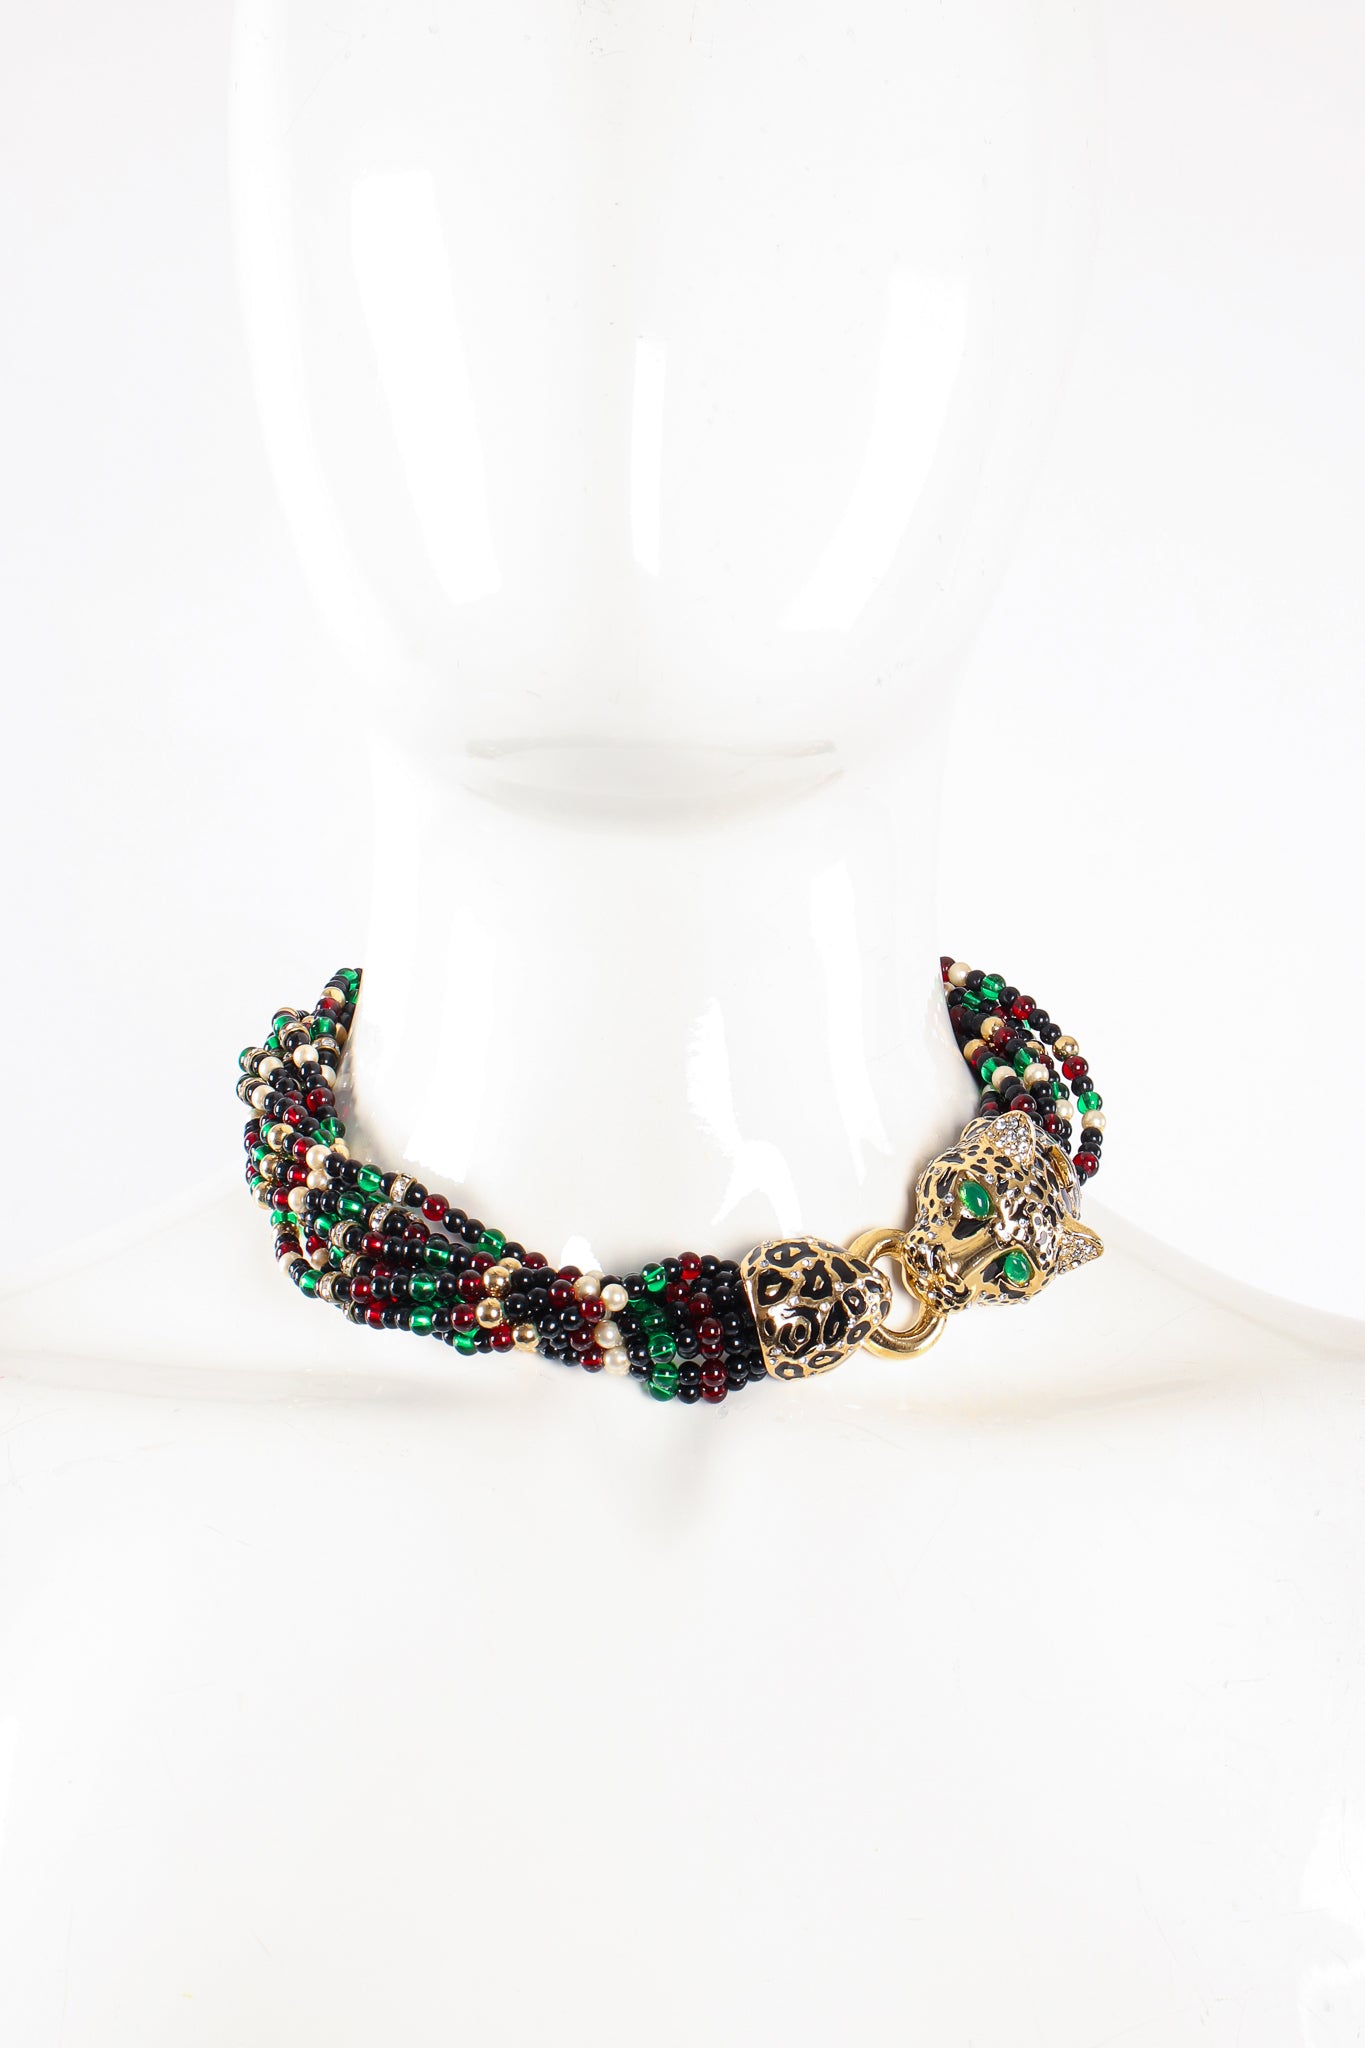 VIntage Ciner Beaded Cheetah Collar Necklace on Mannequin at Recess Los Angeles